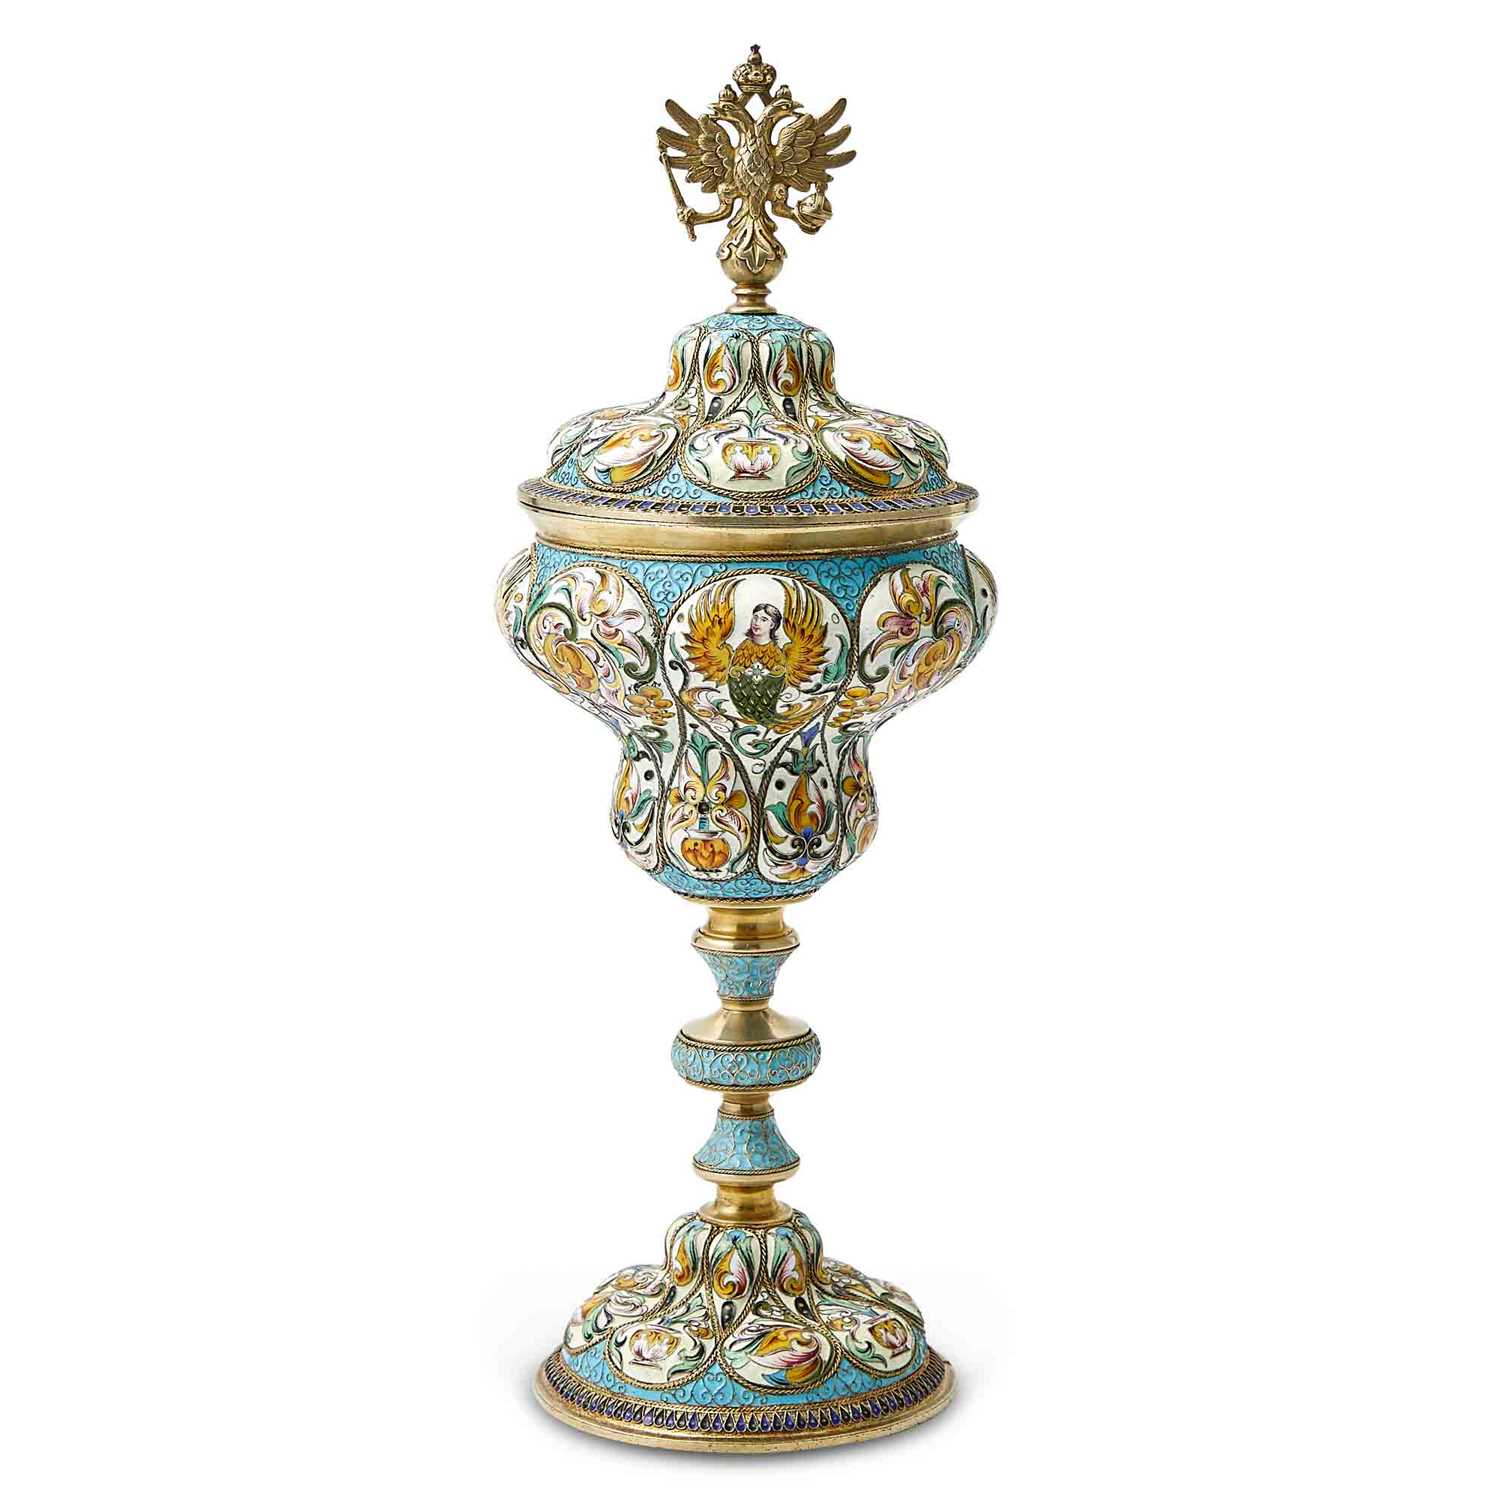 Lot 612 - Russian Silver-Gilt and Cloisonné Enamel Cup and Cover